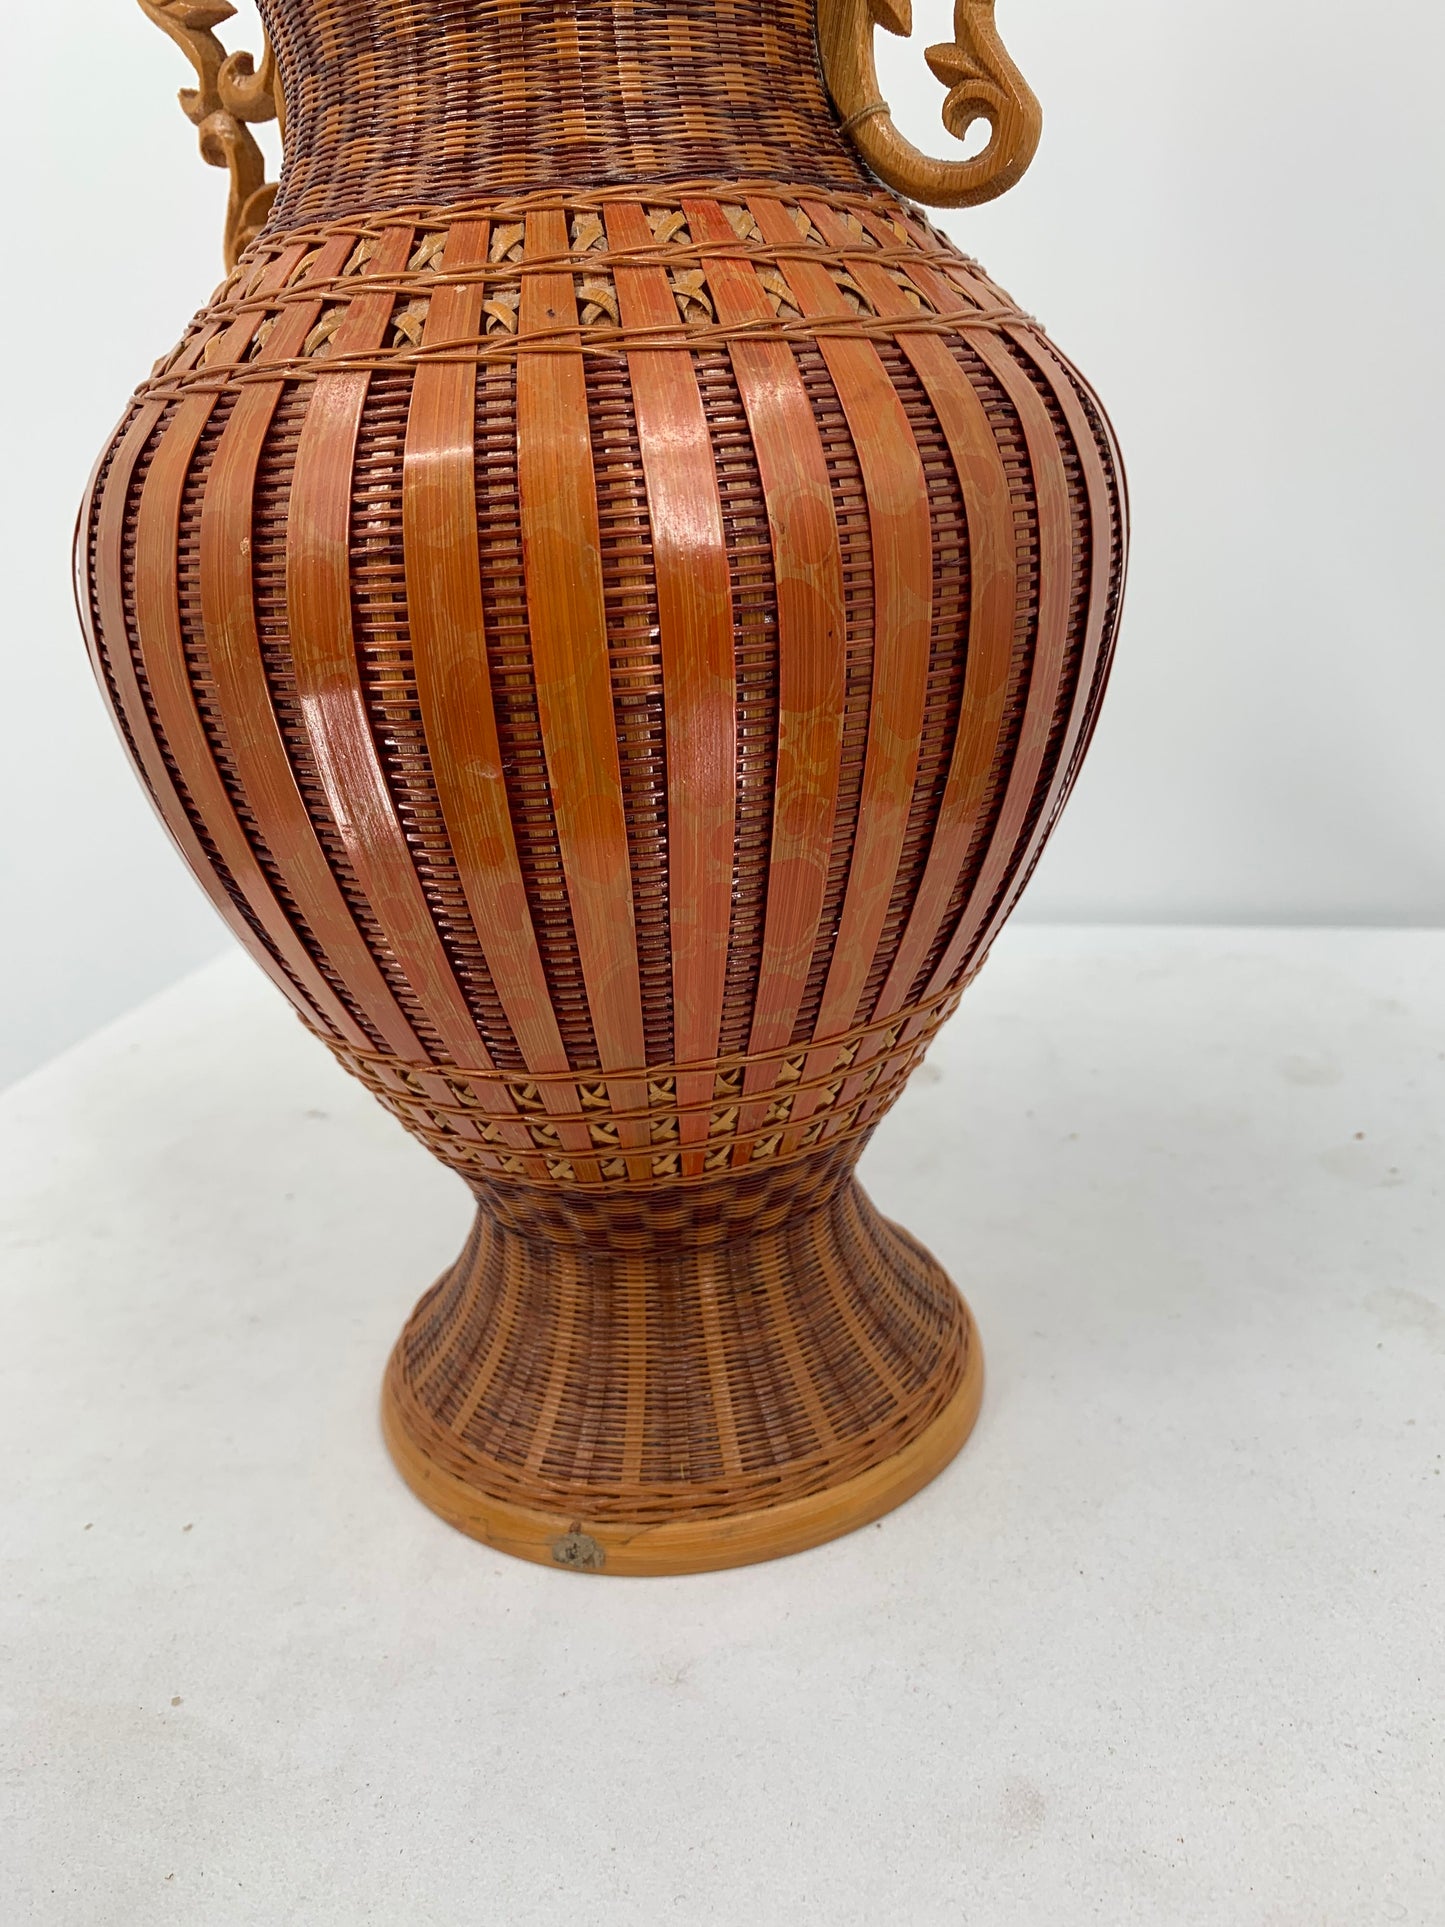 Vintage Wicker 11 Inch Tall Vase With Ceramic Water Cup Shanghai Handicrafts